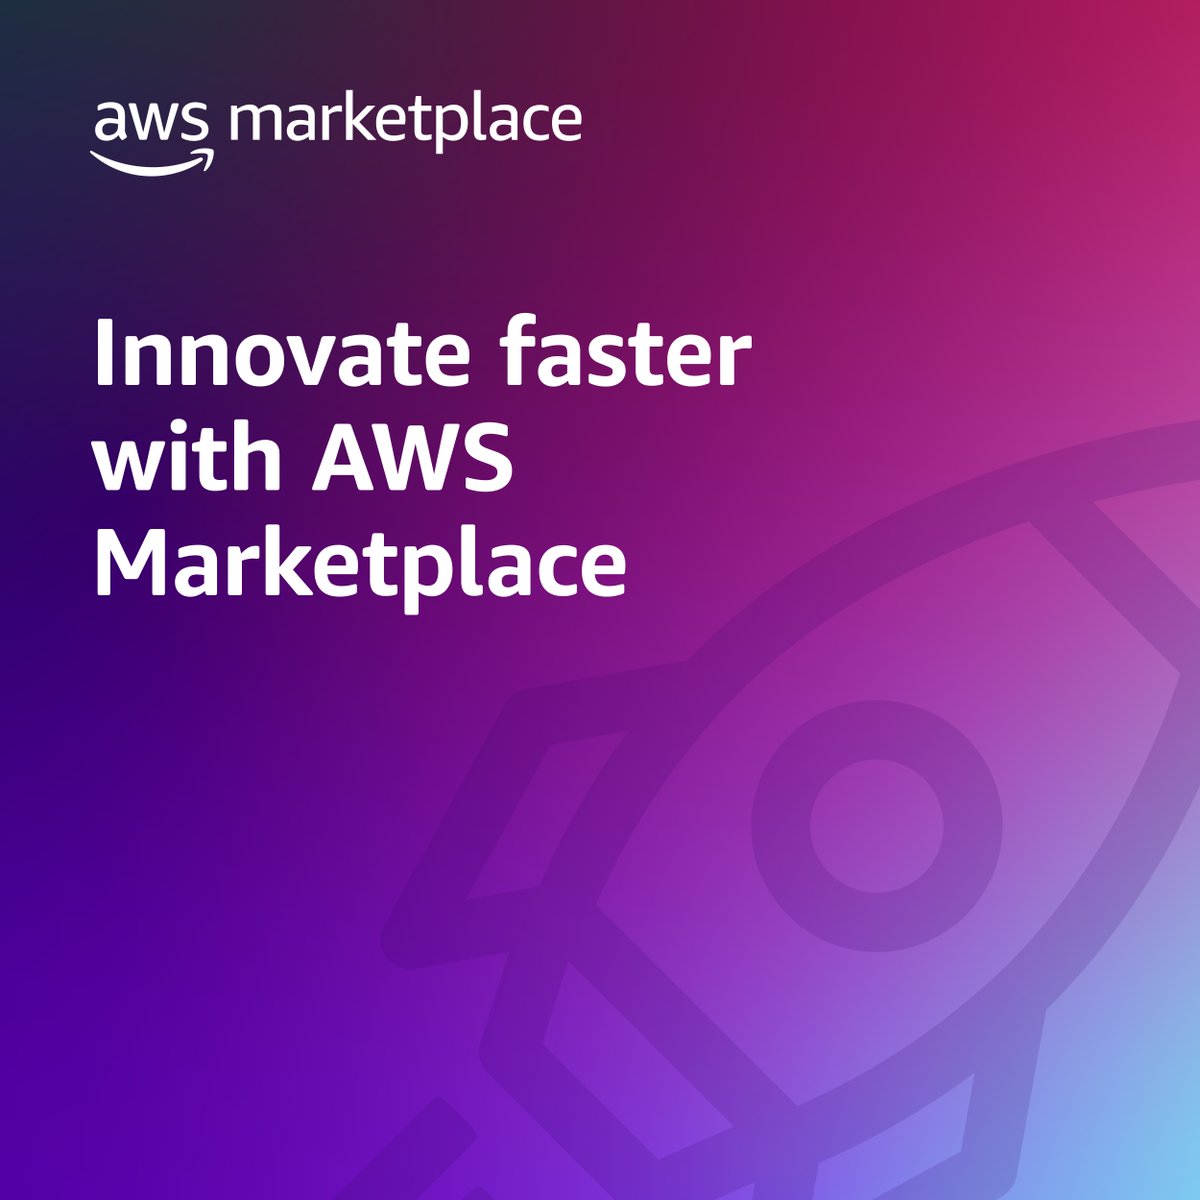 AWS Marketplace makes it easy to find 🔎, try, buy, deploy 🚀, and manage third-party software, services, and data. Get started: 👉 go.aws/44Ru4DY #AWSMarketplace #cloudsolutions